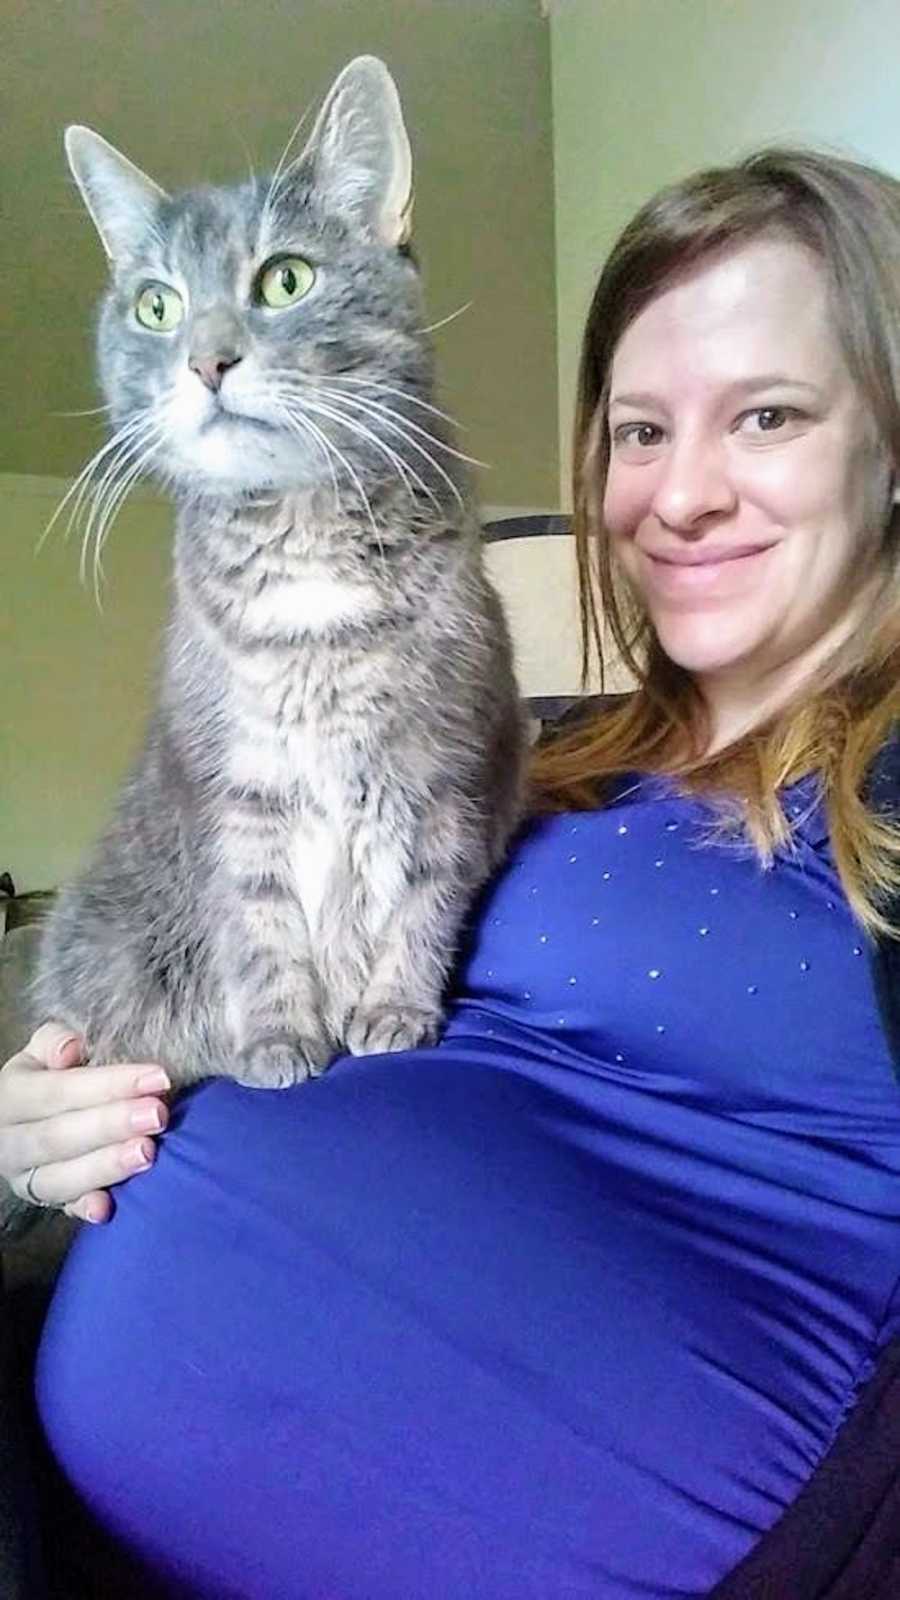 Pregnant woman smiles as her cat sits on her stomach